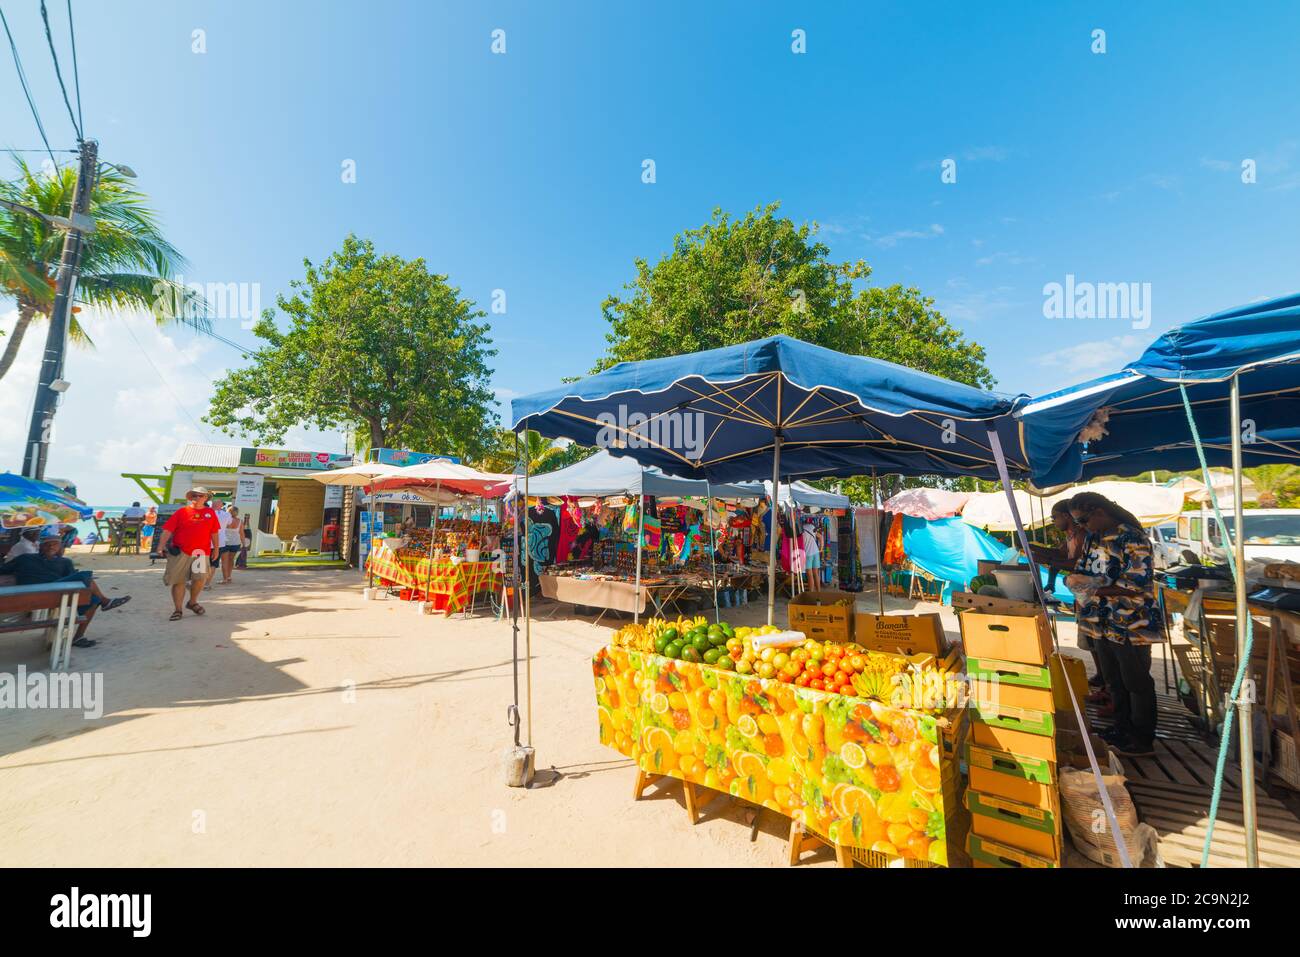 Guadeloupe, FR - February 17, 2019: Fruits and souvenirs stands in Guadeloupe, French west indies. Lesser Antilles, Caribbean sea Stock Photo